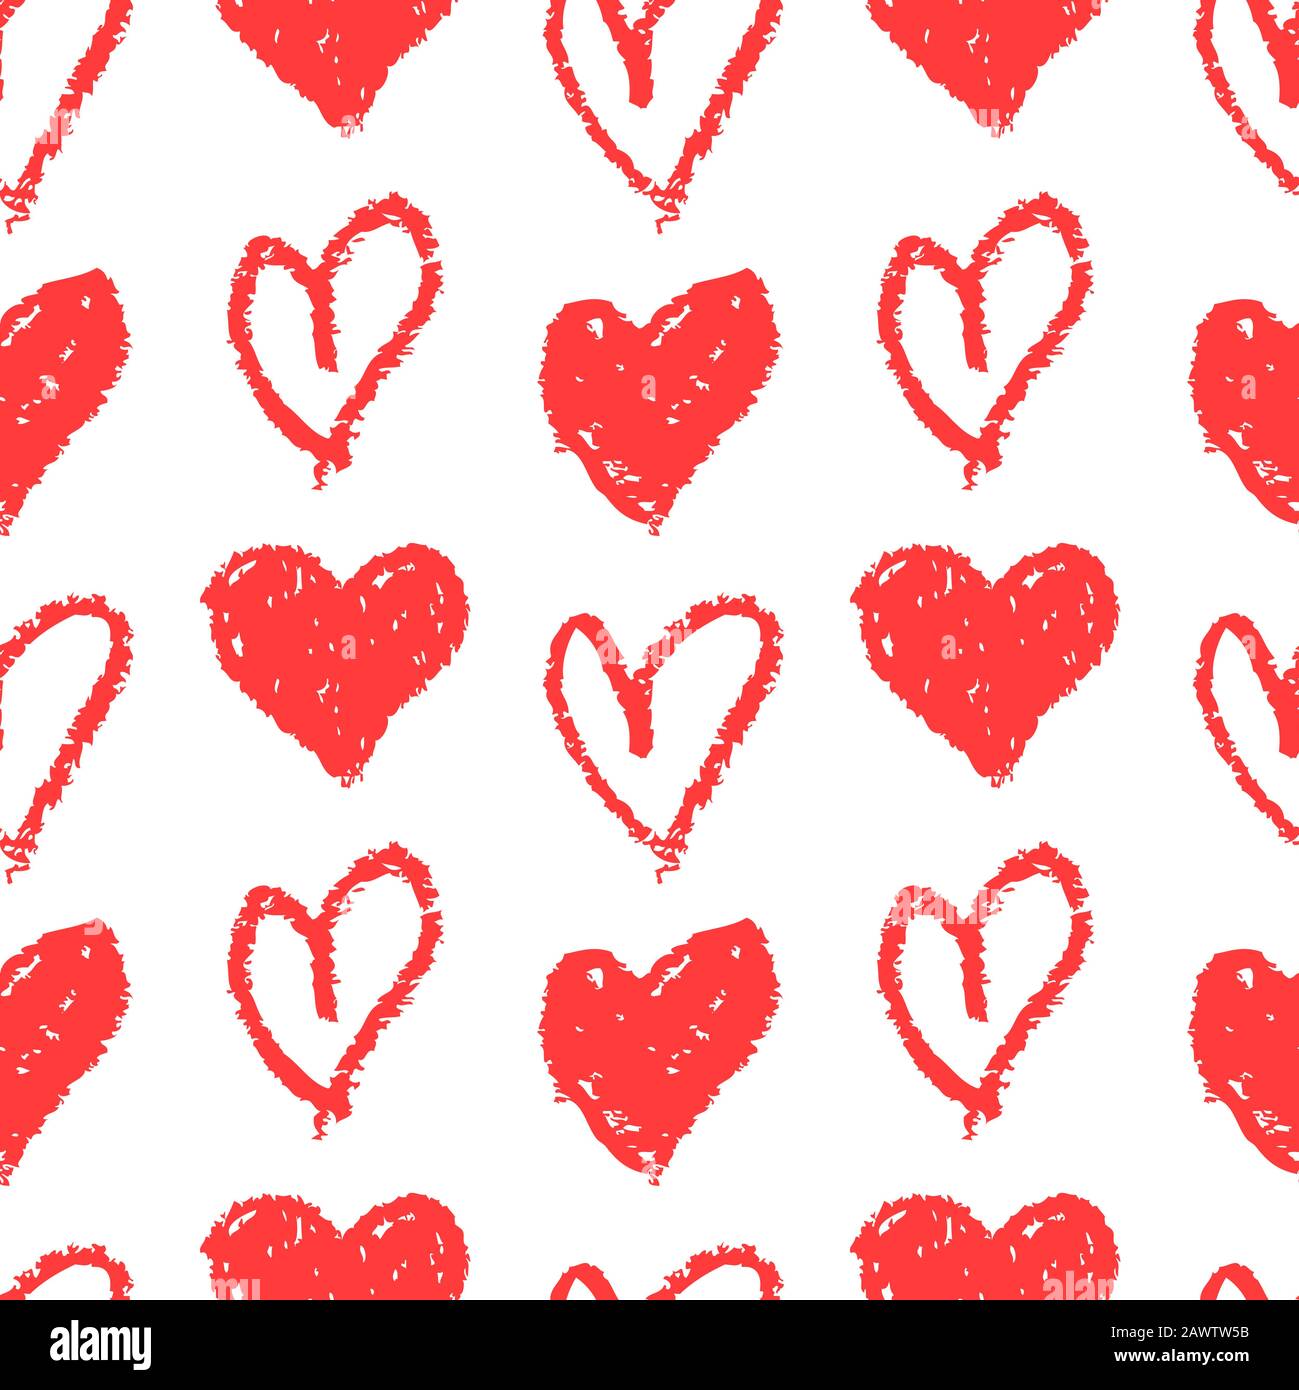 Seamless pattern with hand drawn hearts. White background and red  painted hearts. Print for love, wedding, Valentine's day or other romantic design. Stock Vector